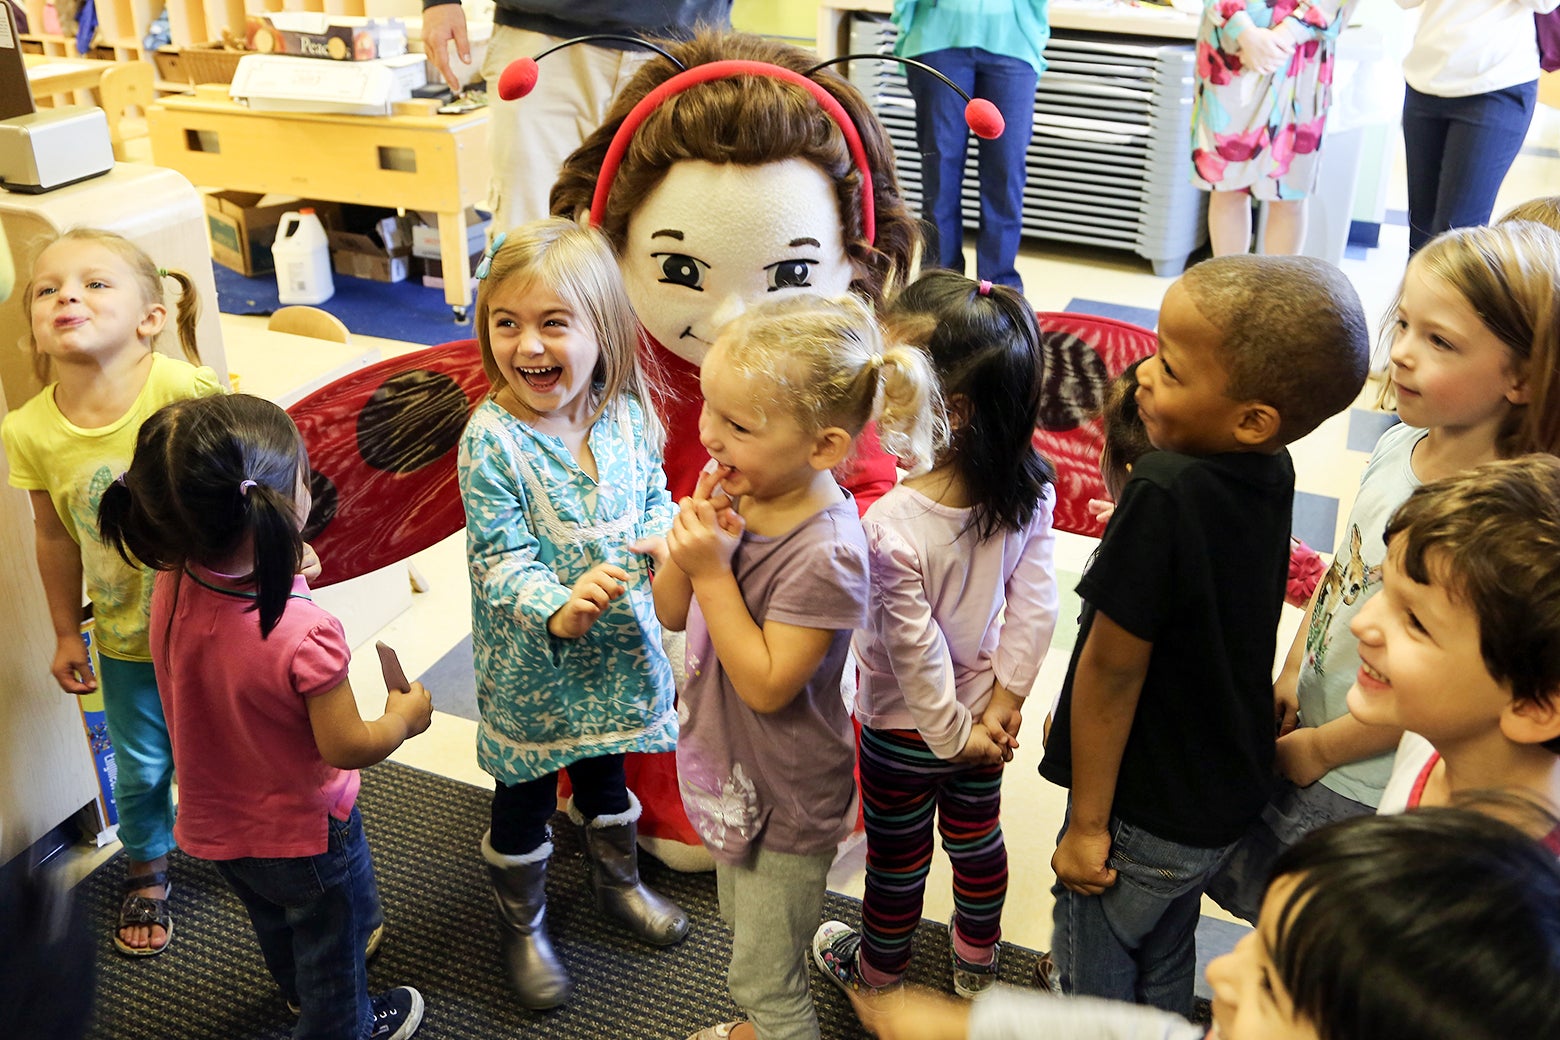 Laughing preschoolers gather around a character dressed as Ladybug Girl in a schoolroom setting.